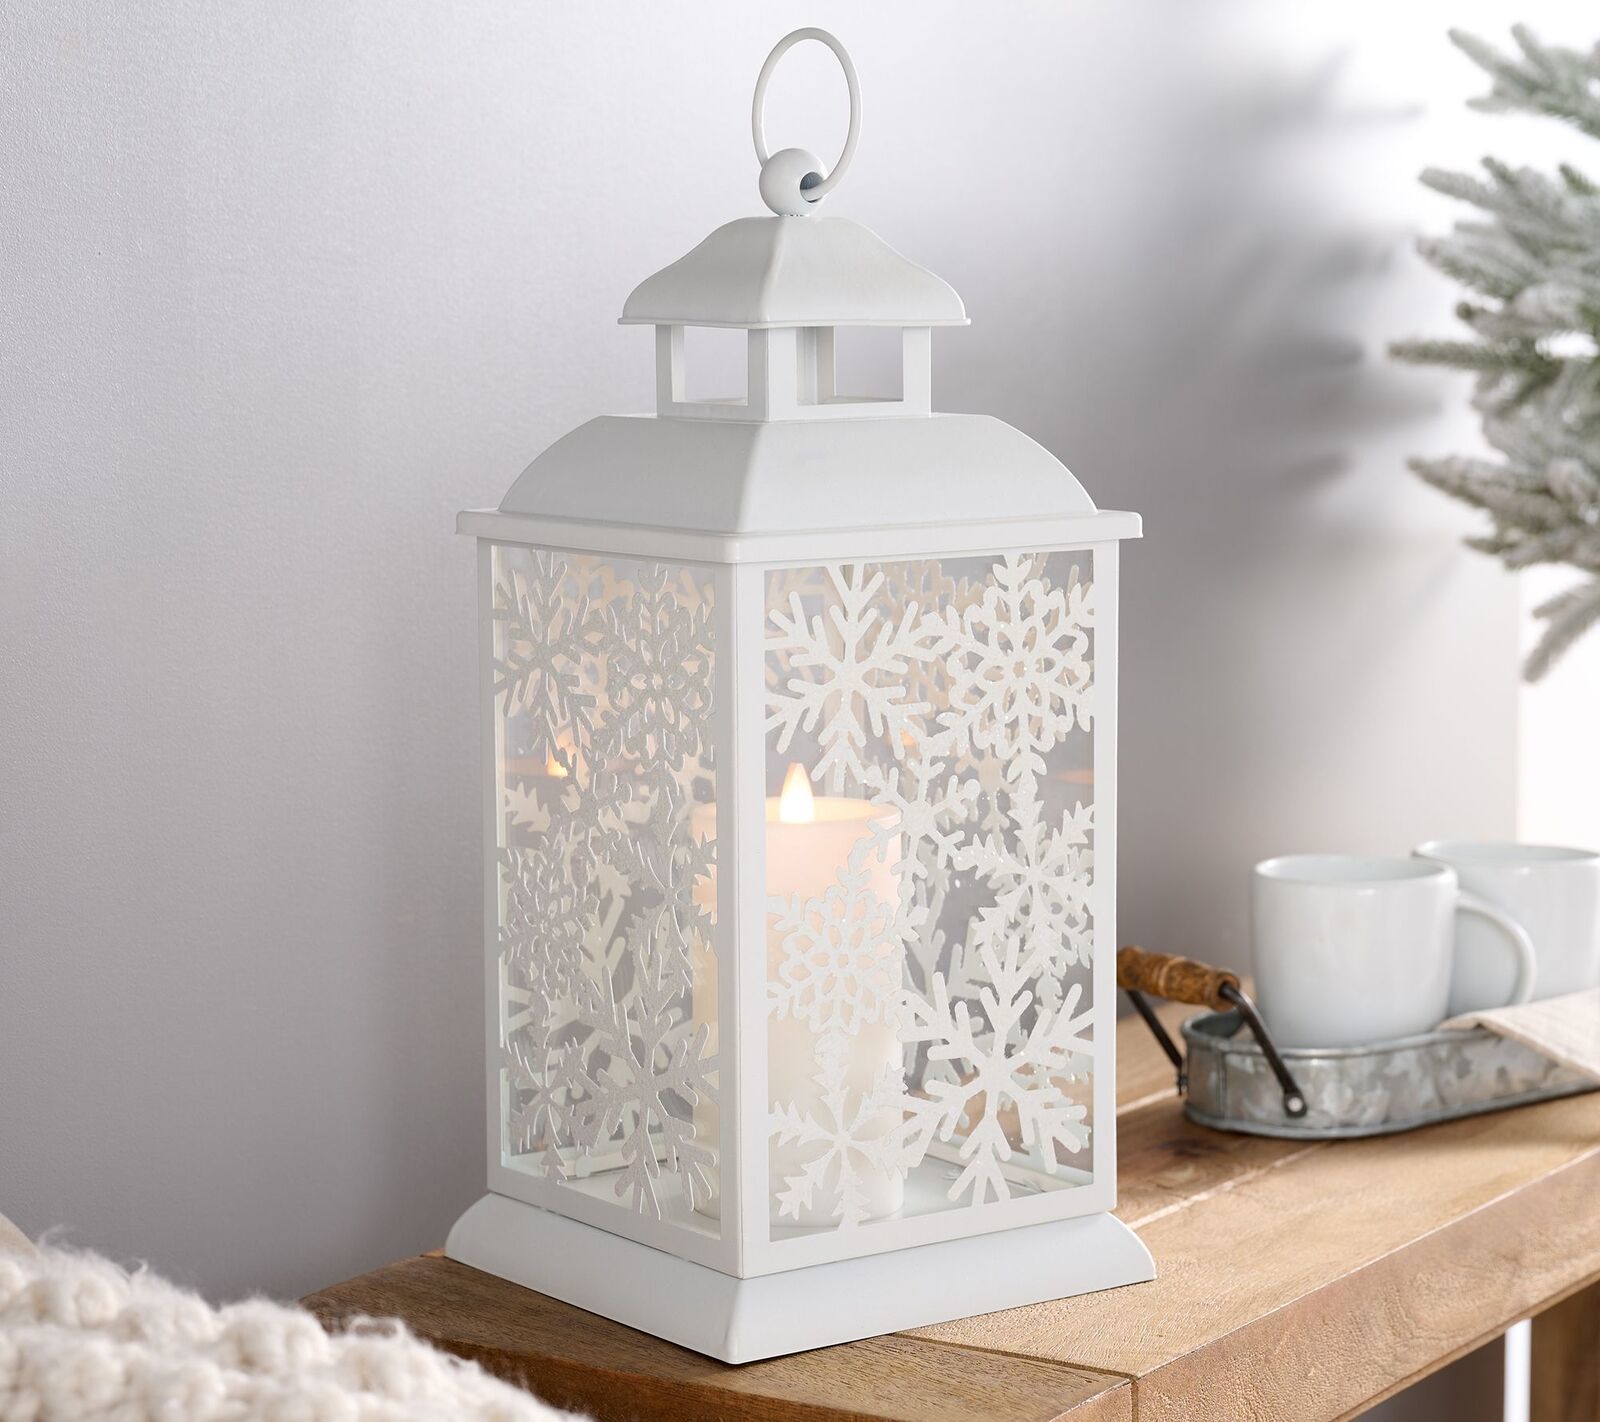 Indoor/Outdoor 16.5" Snowflake "Candlelight" Metal Lantern by Valerie in White - $193.99